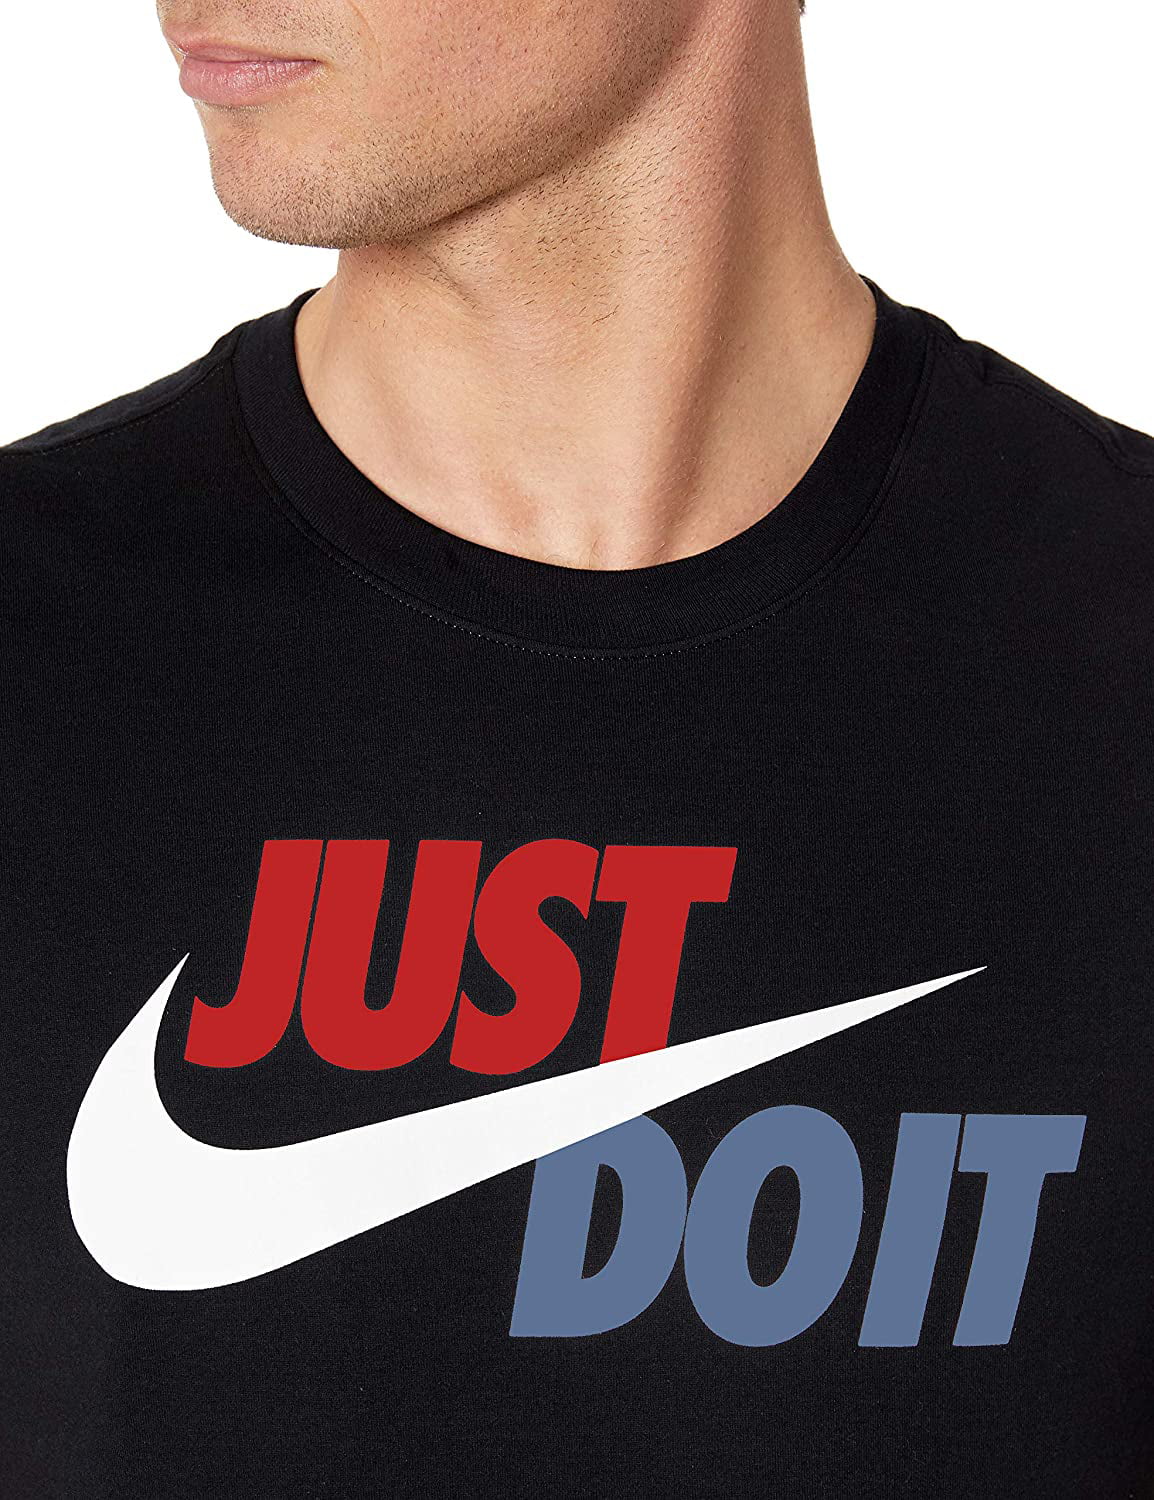 Найк just do it. Nike just. Nike just do it. Nike. Just do it. Nike.